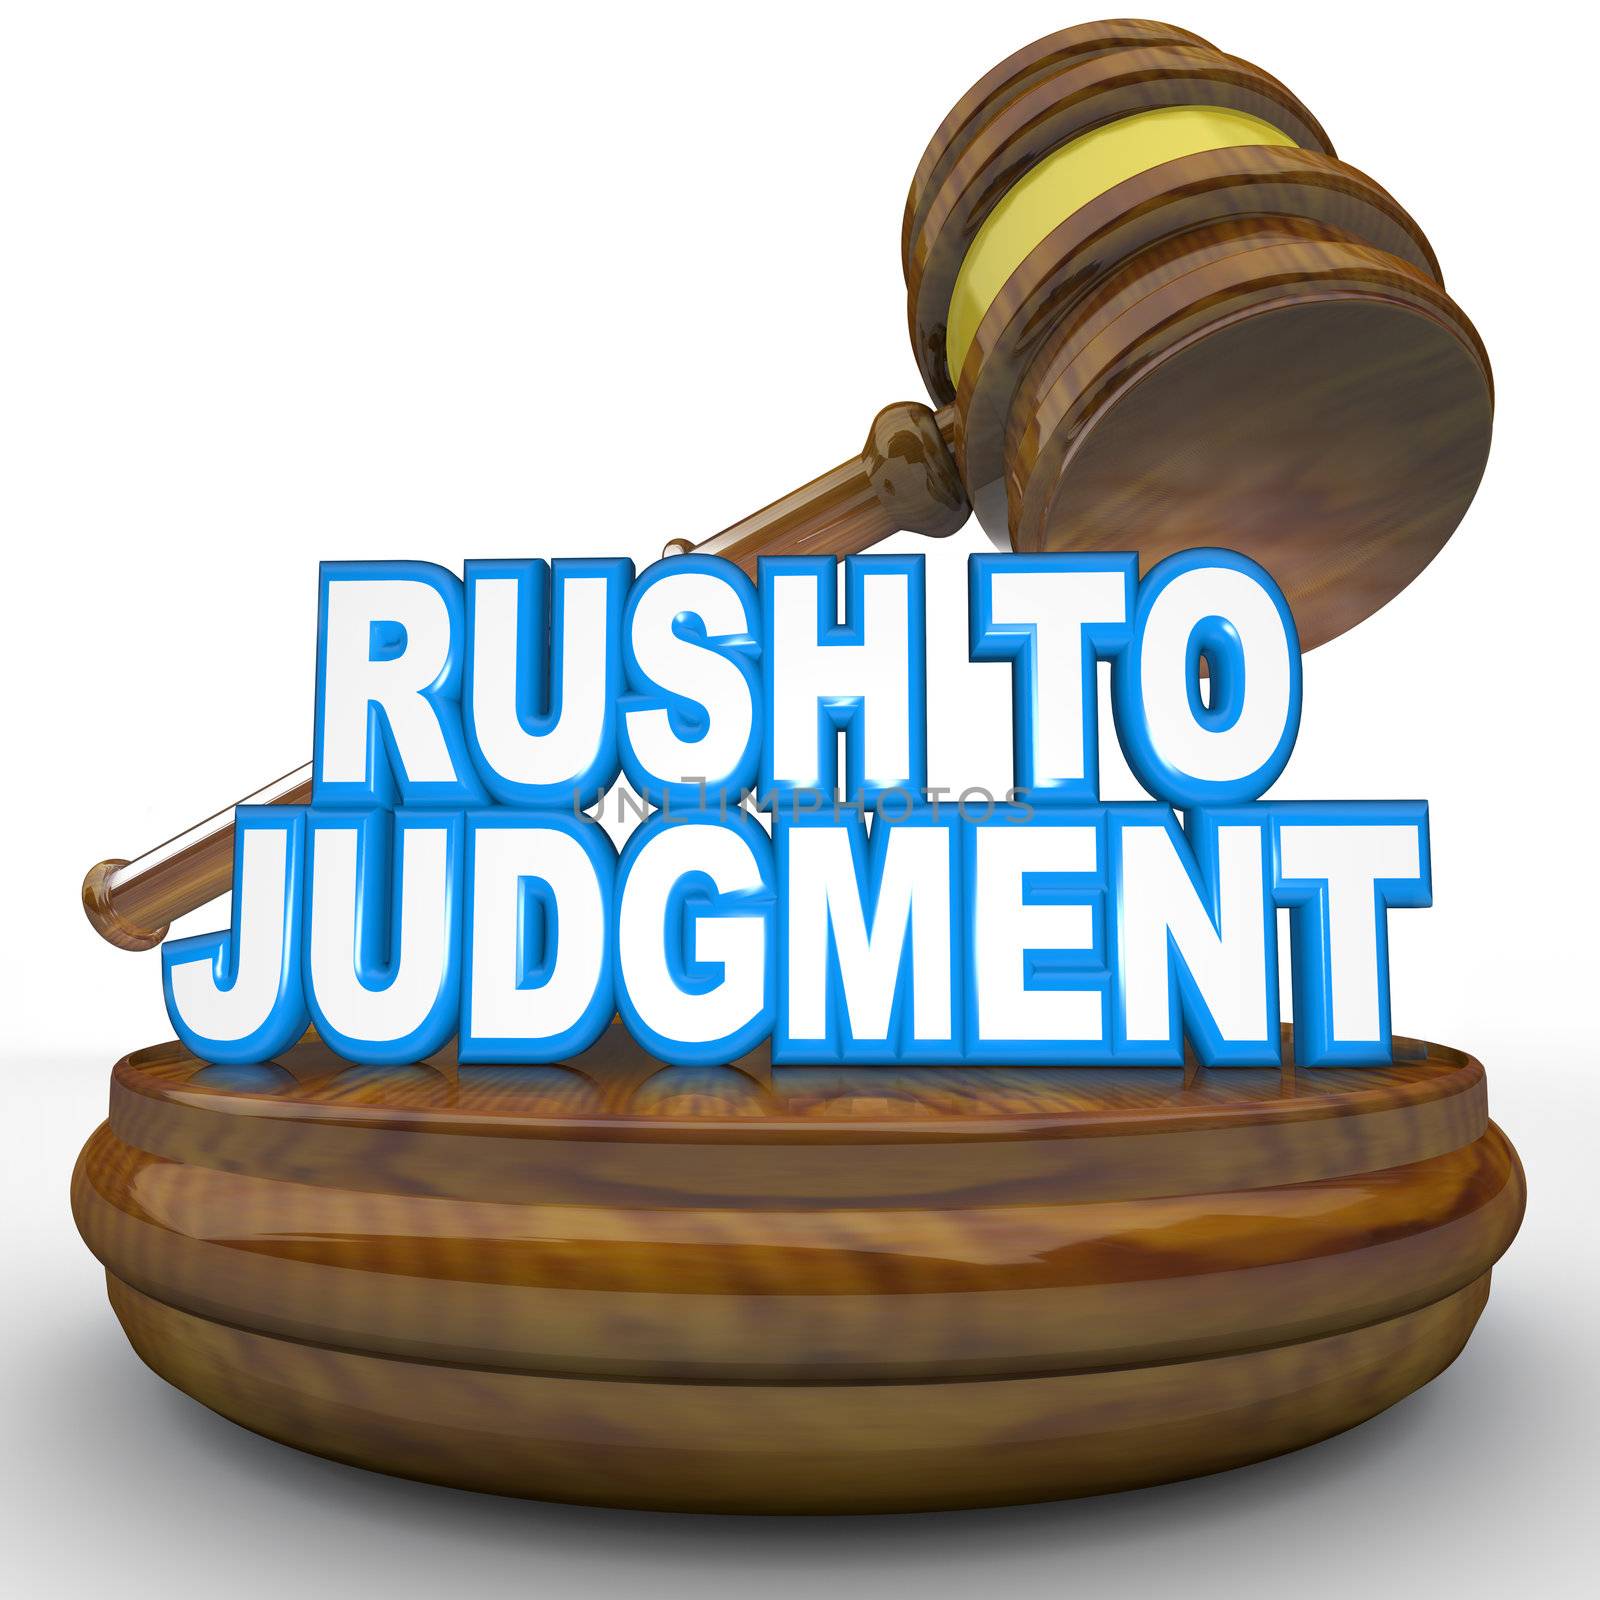 A gavel comes down on the words Rush to Judgment symbolizing a fast or speedy decision made under rushed or hasty conditions